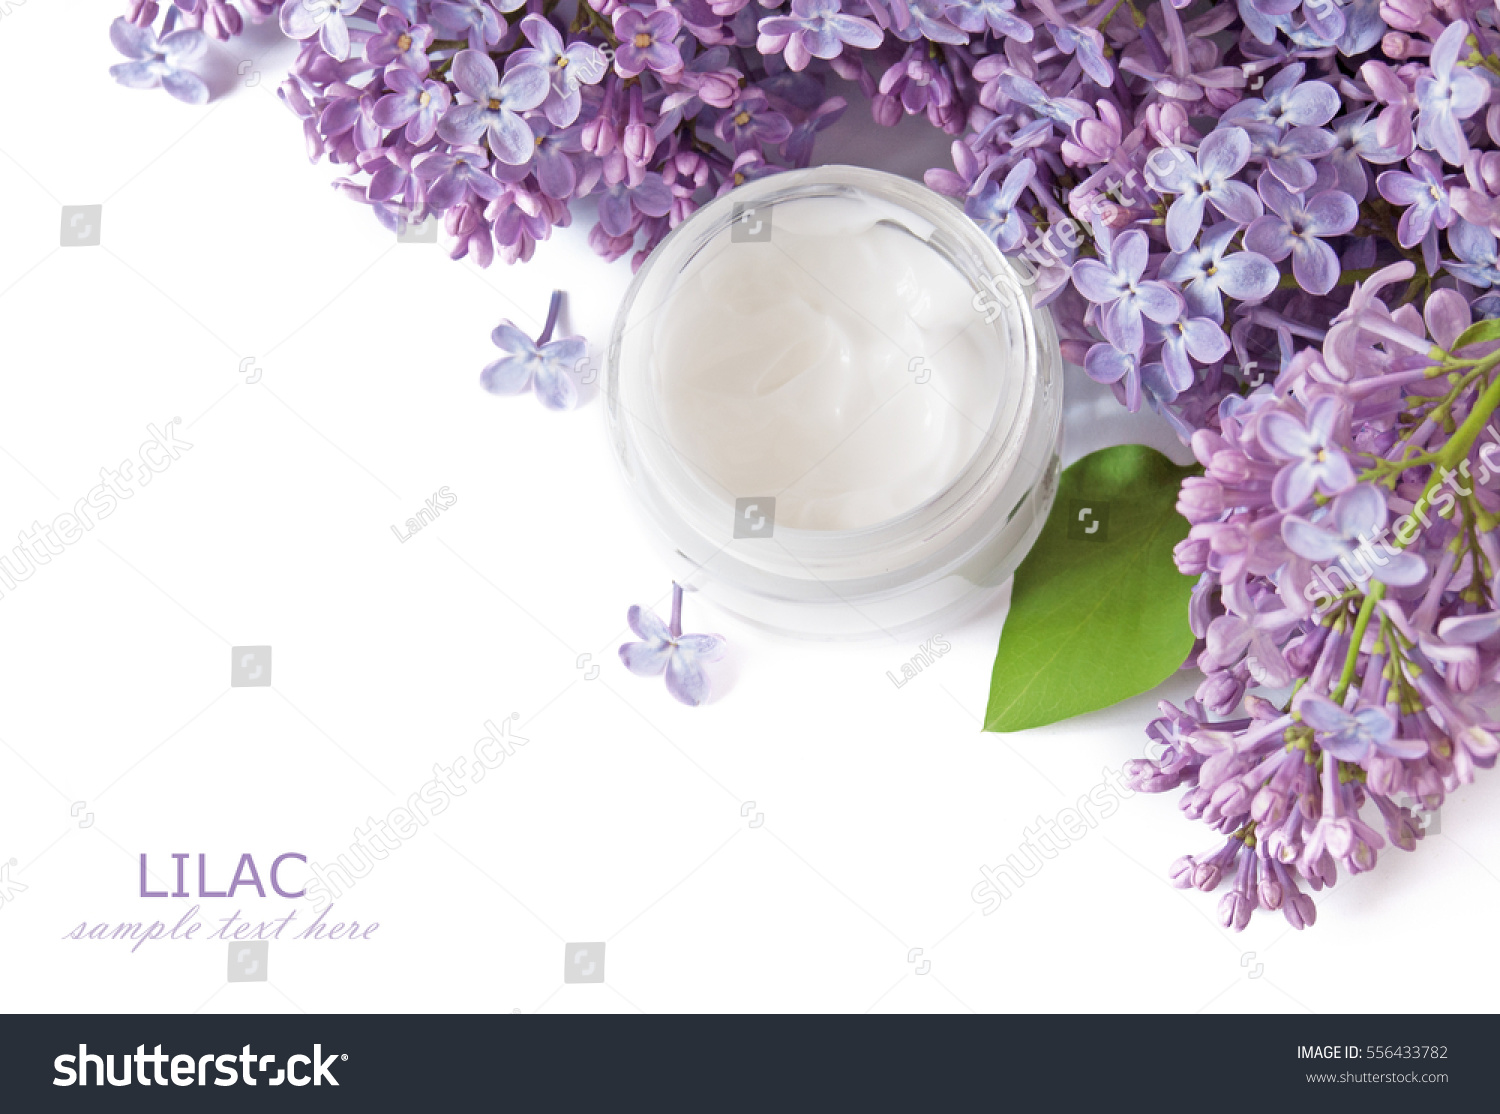 Lilac flowers and cosmetic cream isolated on white background. Natural cosmetic concept #556433782